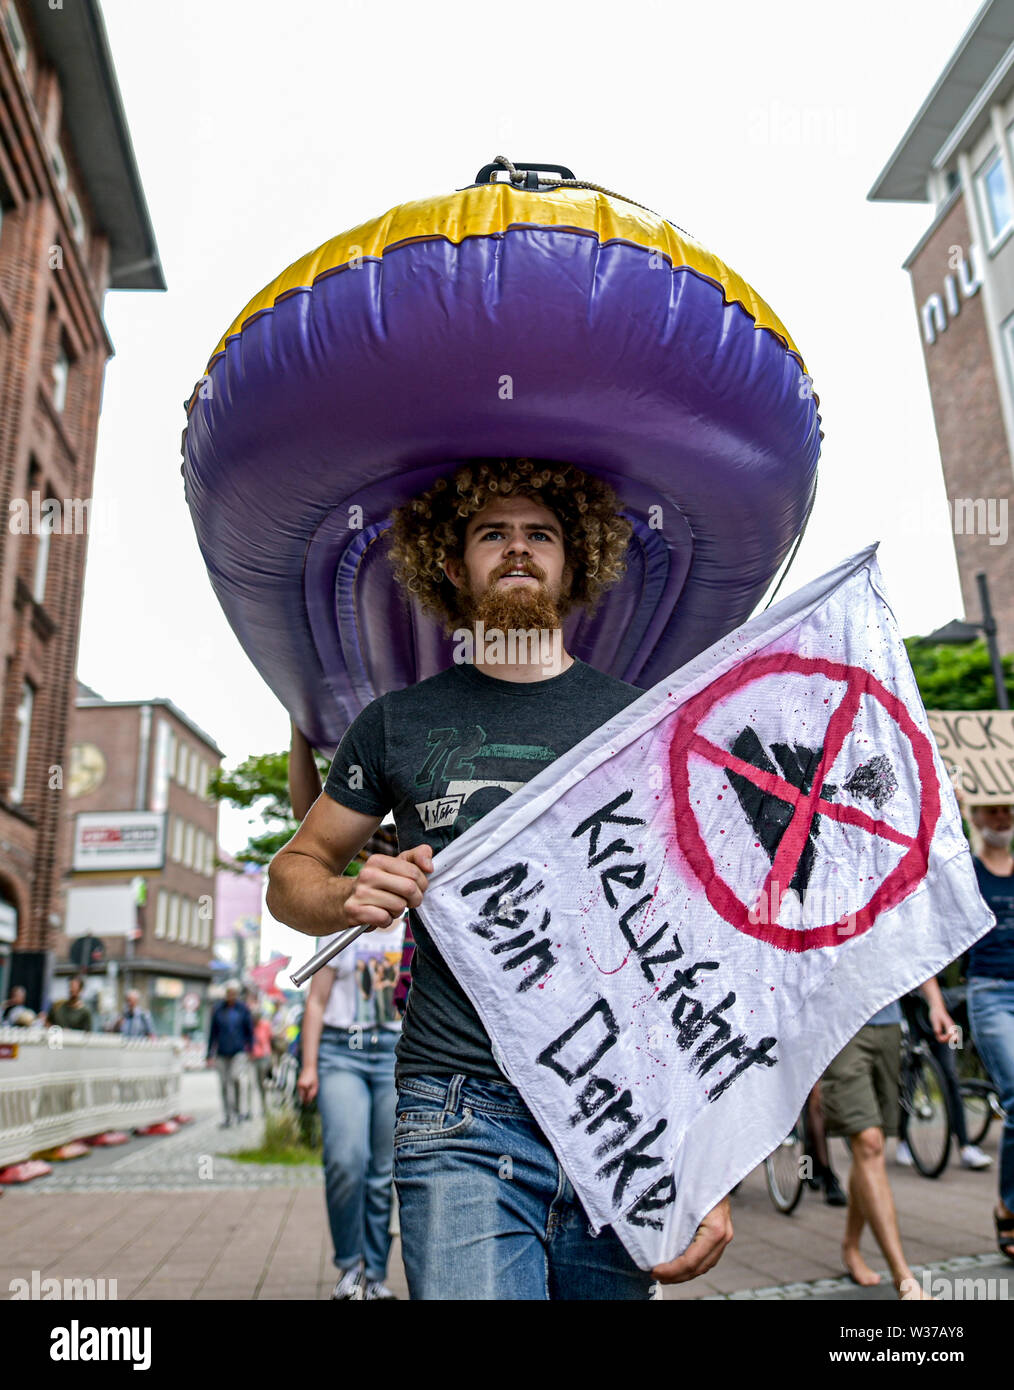 Kiel, Germany. 13th July, 2019. A participant of the demonstration 'Initiative gegen Kreuzfahrtschiffe' and 'TKKG' carries a rubber dinghy on his head and a poster with the inscription 'Kreuzfahrt Nein Danke' in his hands during the march through downtown Kiel. The ships 'MSC Meraviglia', 'Mein Schiff 1' and 'Aidaprima' dock in Kiel on 13 July. Credit: Axel Heimken/dpa/Alamy Live News Stock Photo